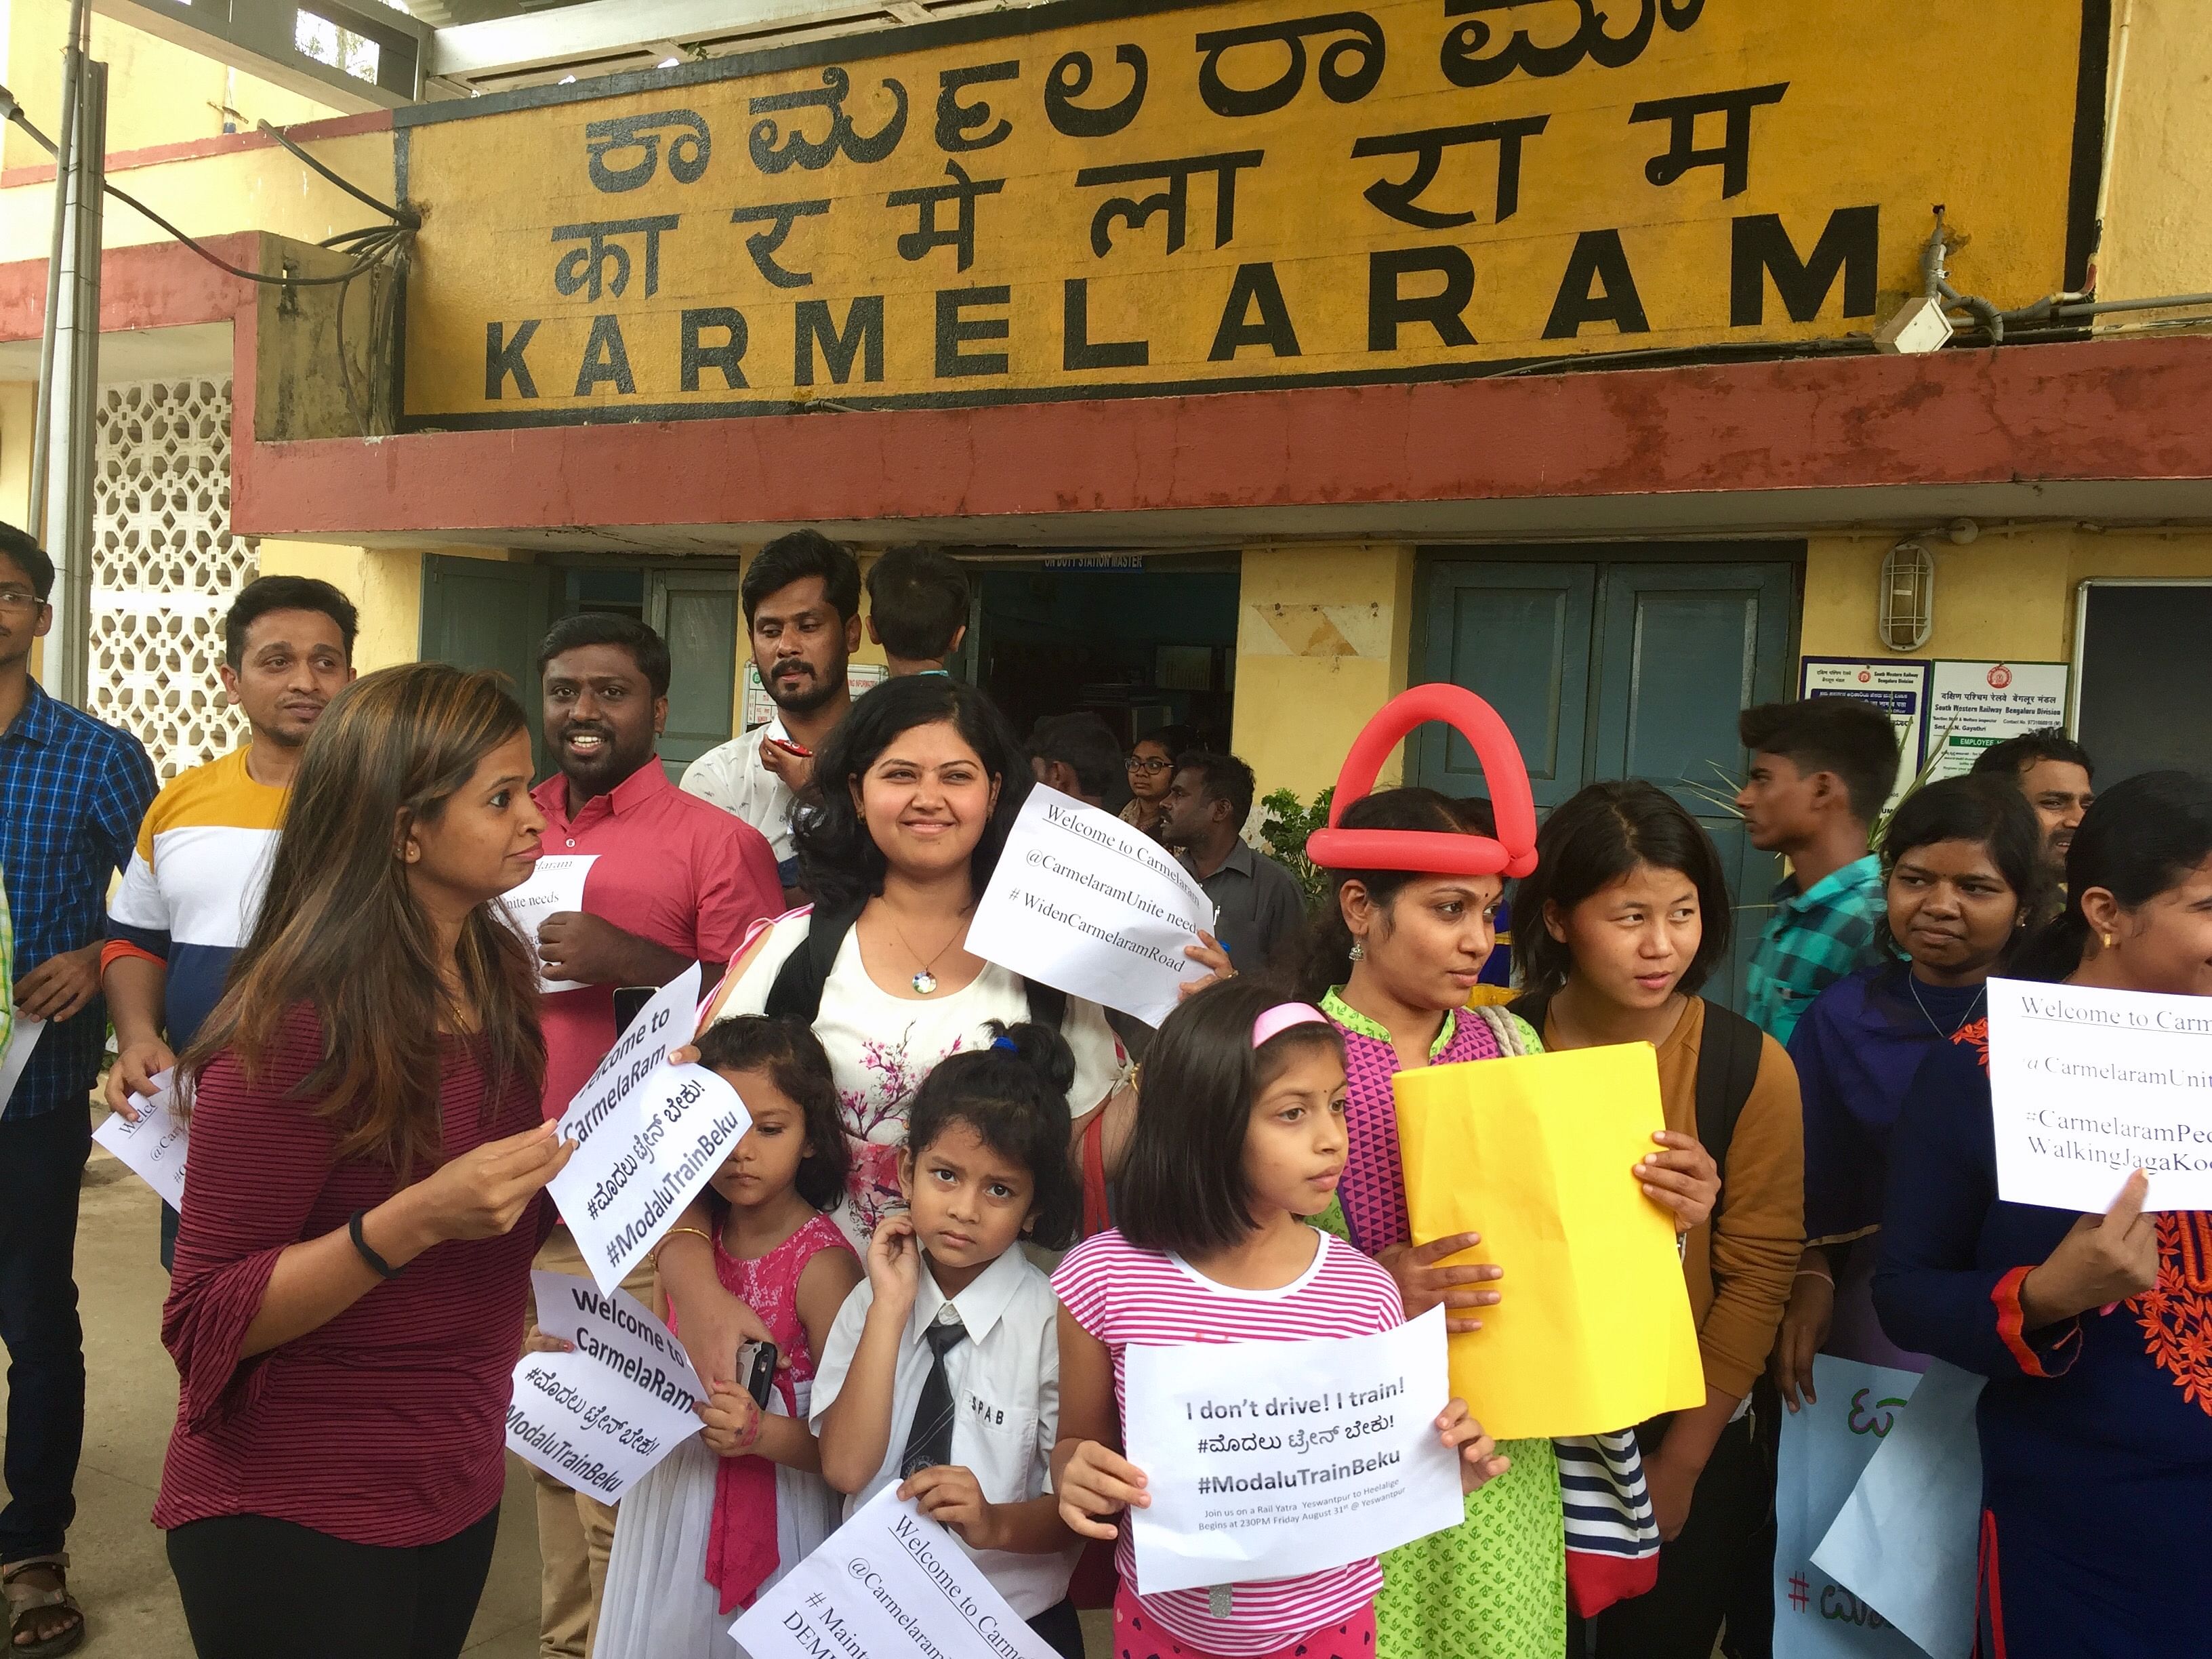 The participants of the rail yatra taken out to raise awareness about the city’s rail network board the train at Karmelaram on Friday. DH Photo/Grace Hauck